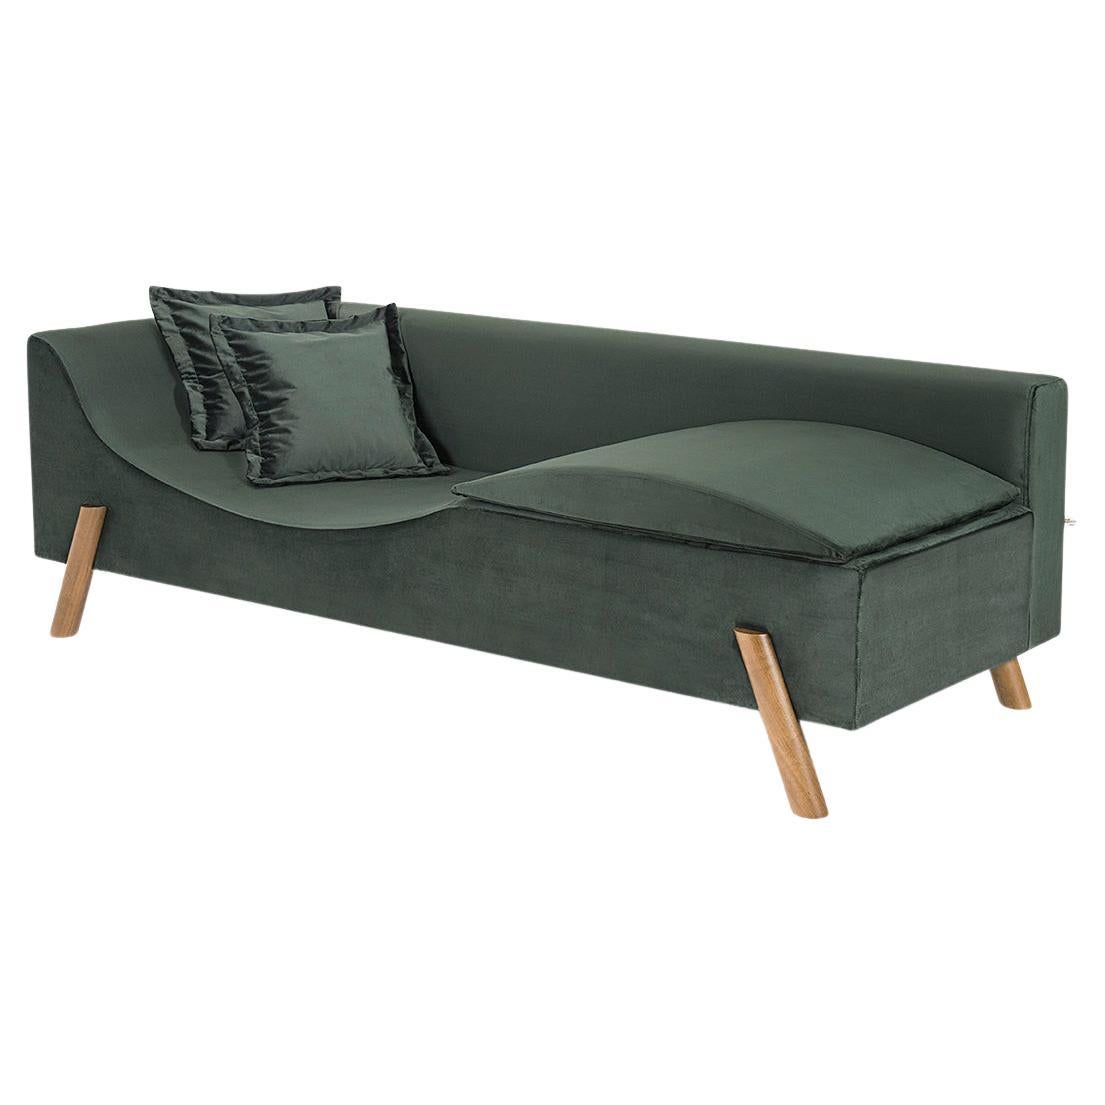 "Flag" Couch and Chaise Longue in Green Velvet and Wood Feet 